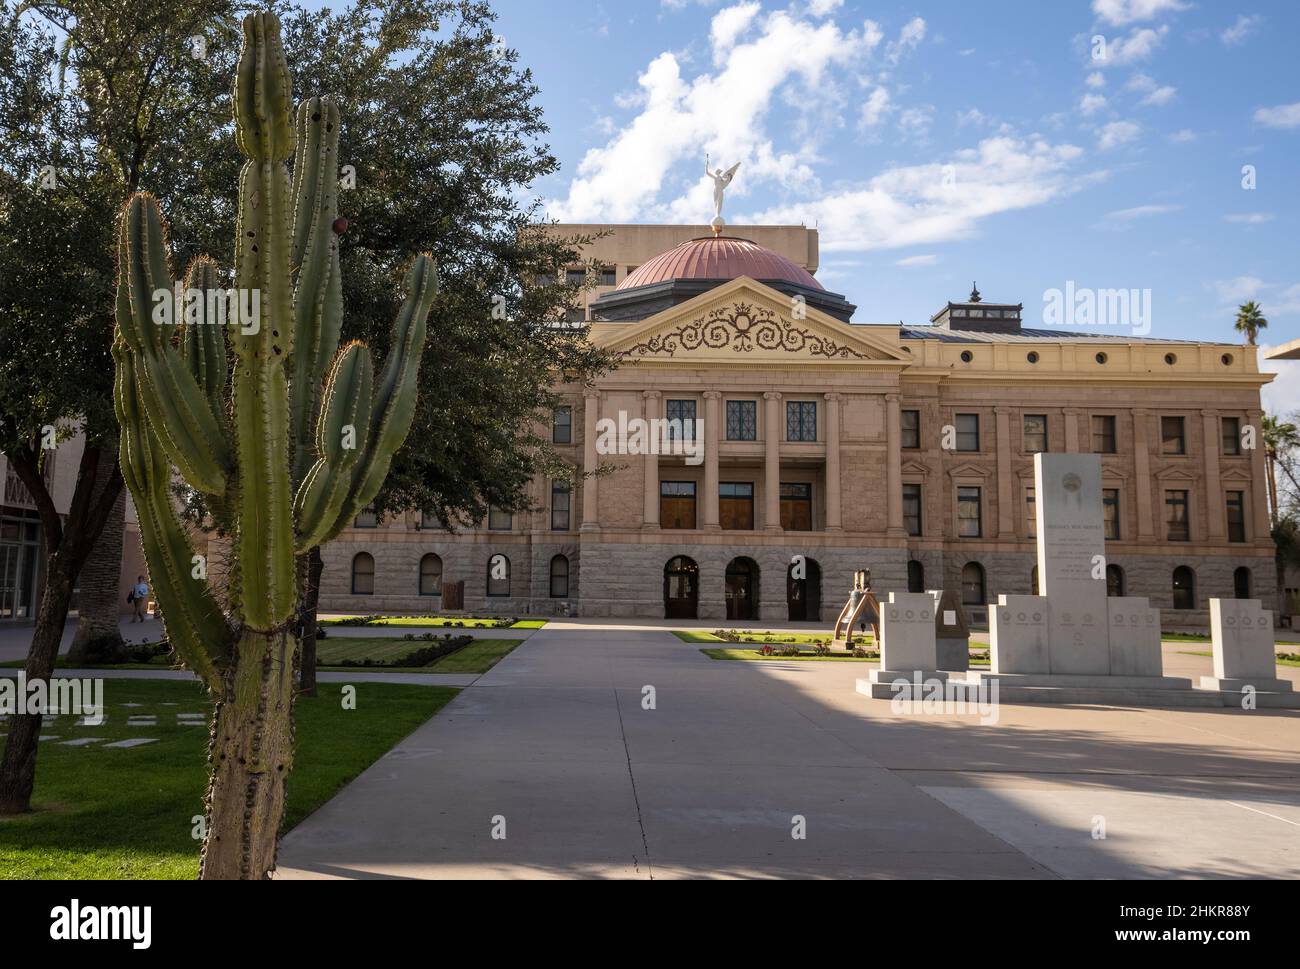 The Arizona State Capitol in Phoenix, Arizona, United States.The Capitol is now maintained as the Arizona Capitol Museum. Stock Photo